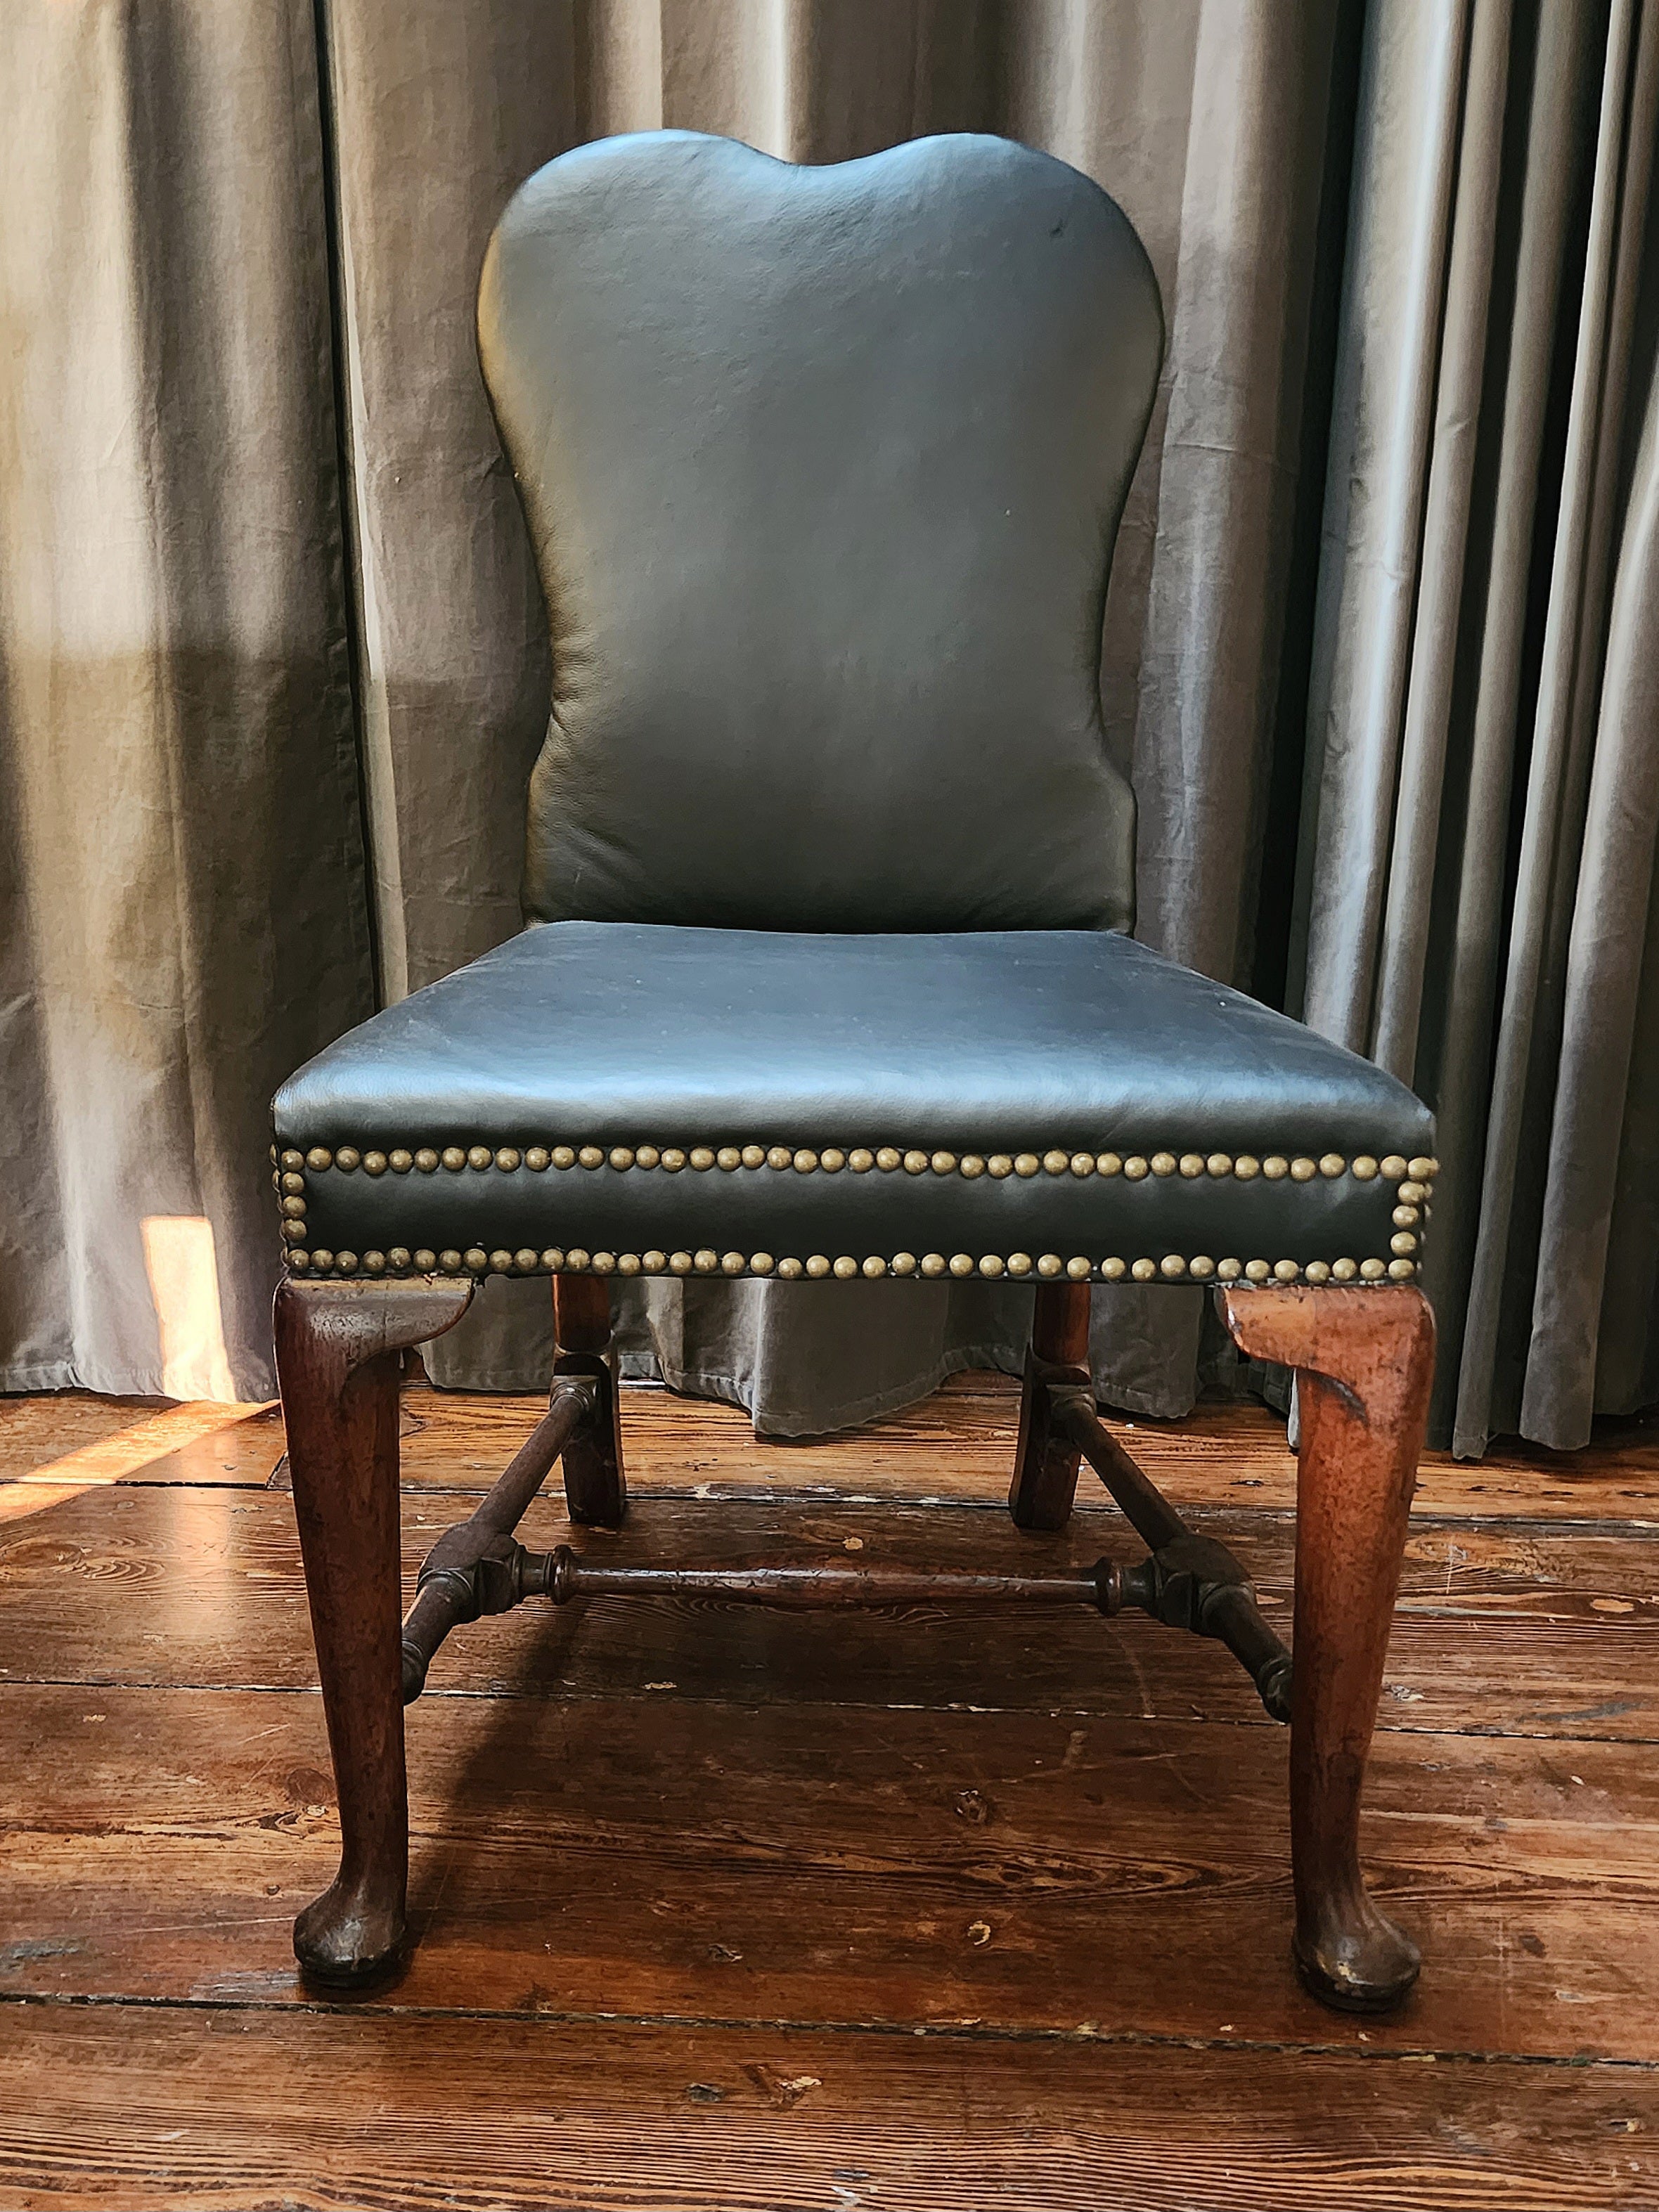 Beautiful and comfortable, this walnut upholstered chair with cabriole legs, yoked crest and delicate block and turned stretchers is 18th century elegance with a timeless modernity. 
Provenance: Purchased from an East Hampton Estate.

